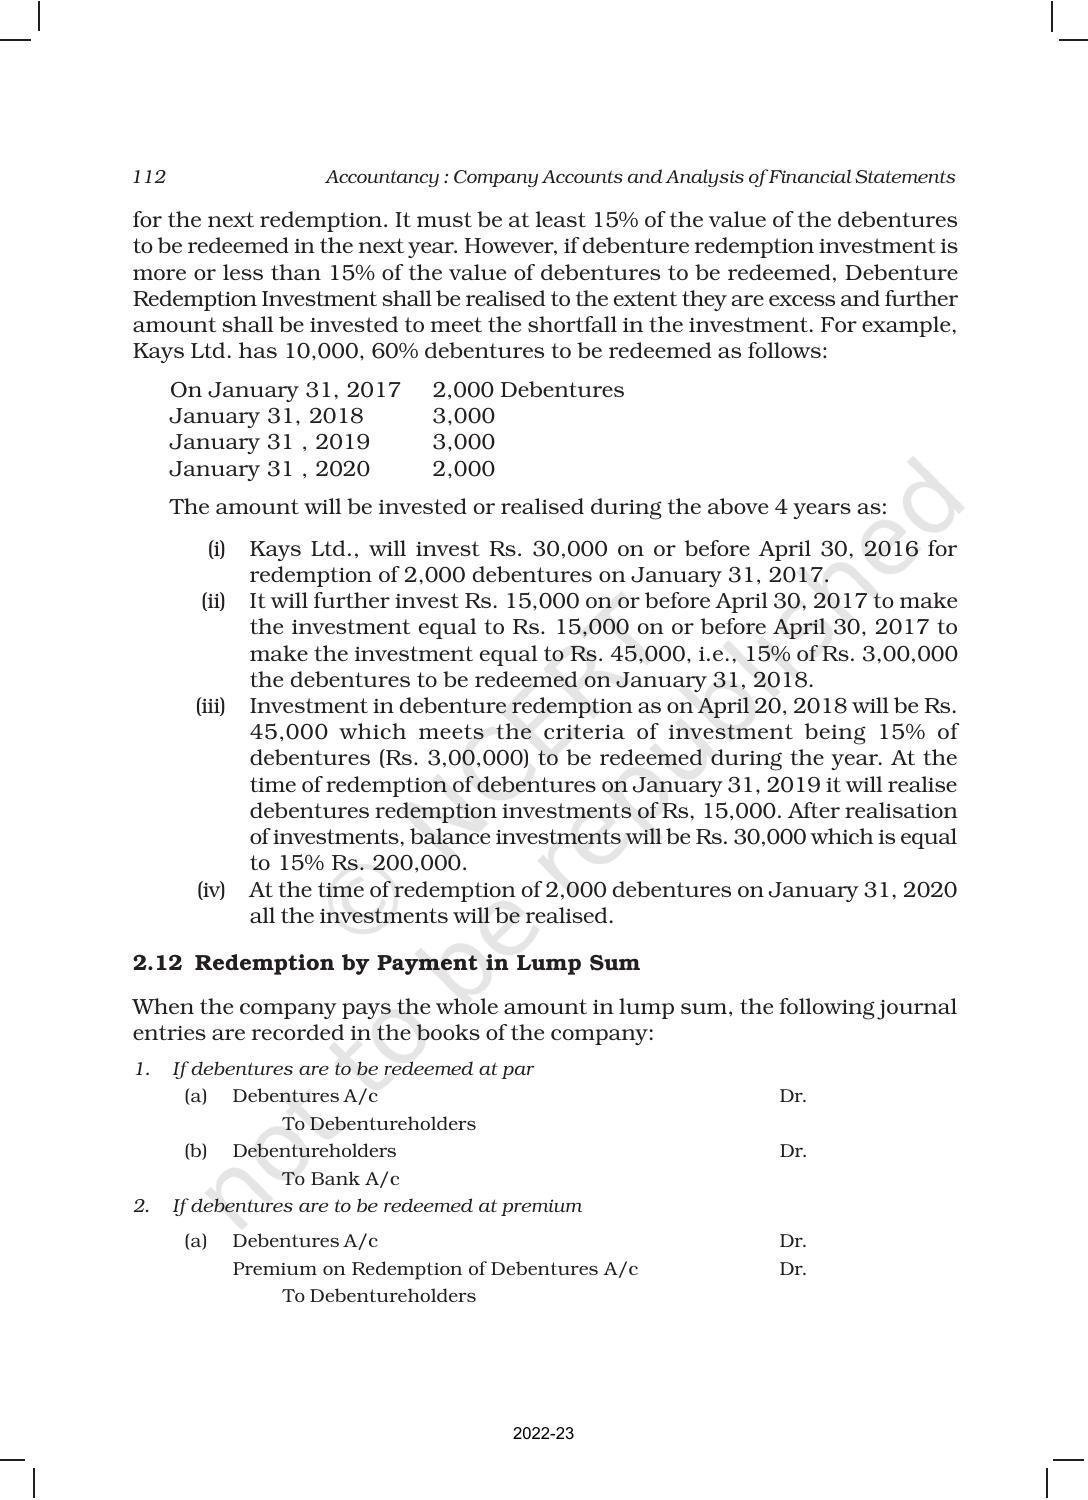 NCERT Book for Class 12 Accountancy Part II Chapter 1 Issue and Redemption of Debentures - Page 38